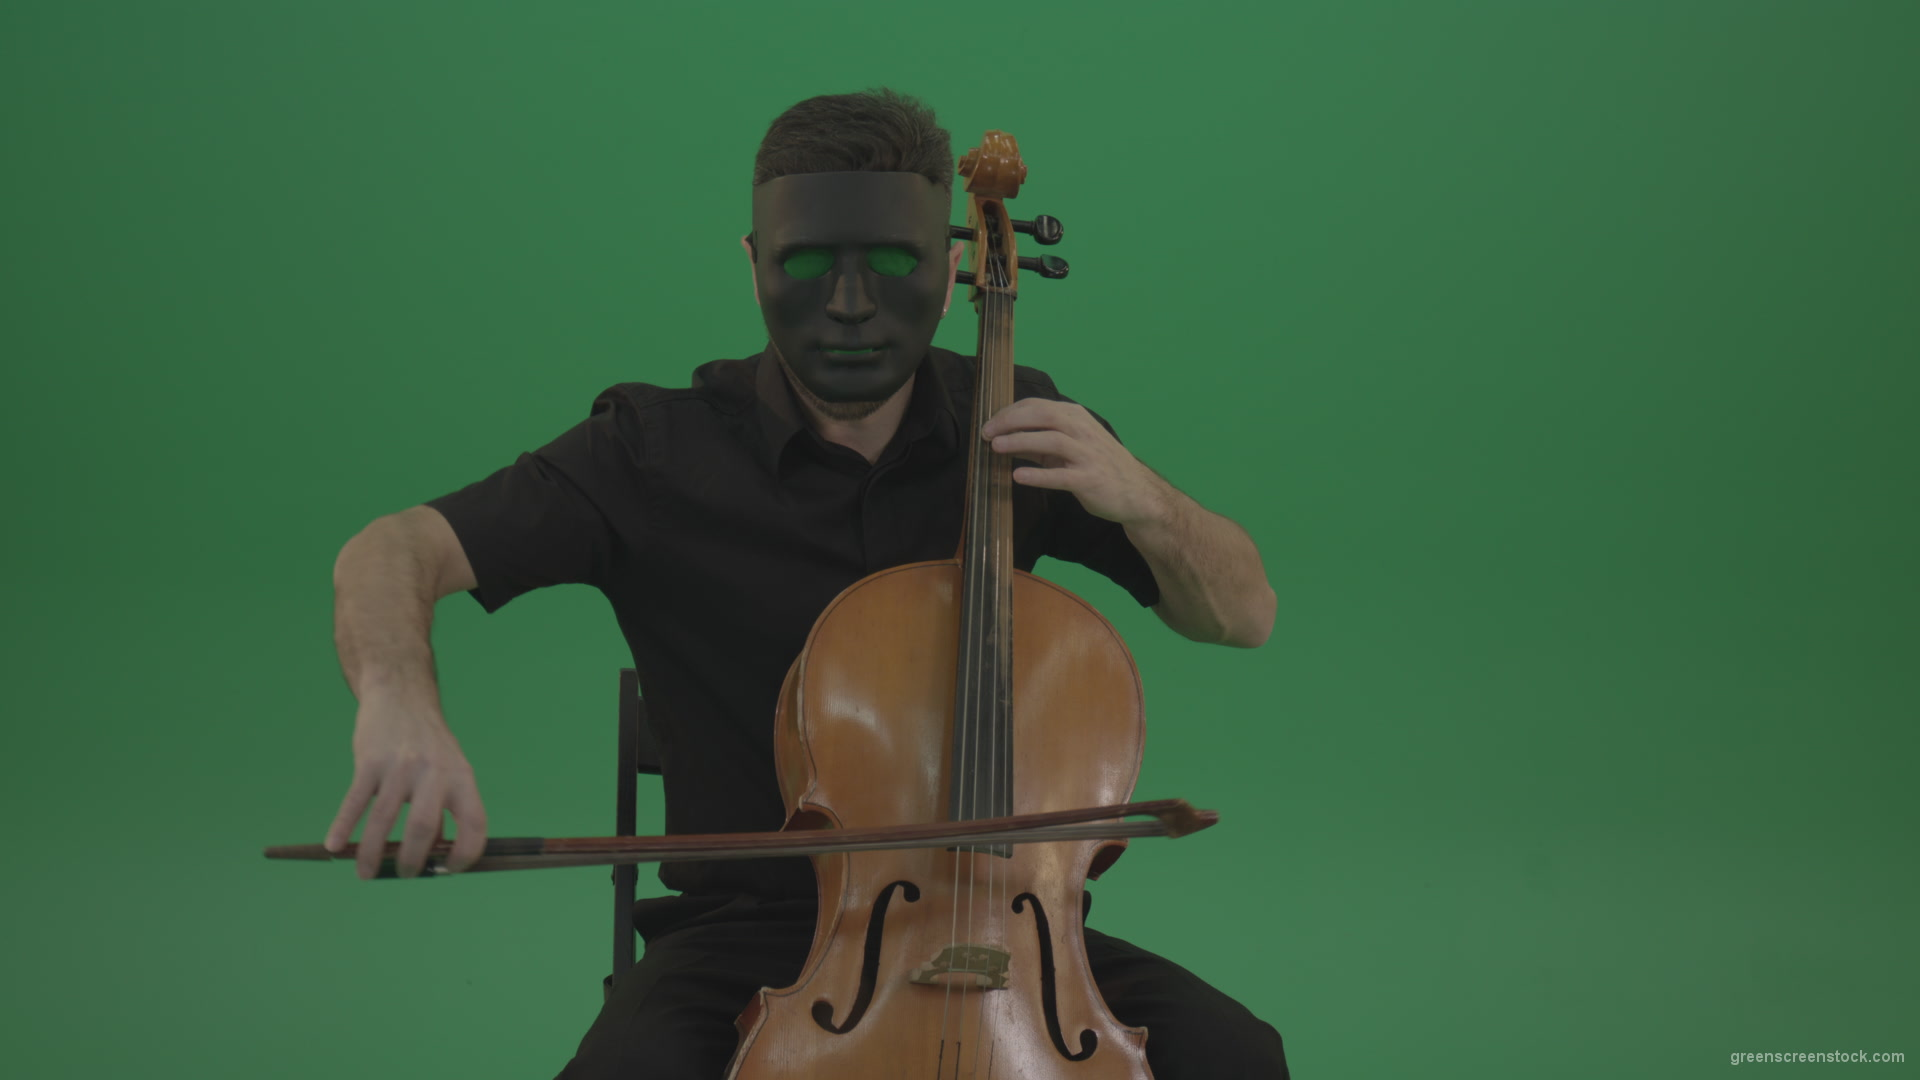 Gothic-Man-in-black-mask-playing-violoncello-cello-strings-music-instrument-isolated-on-green-screen_009 Green Screen Stock